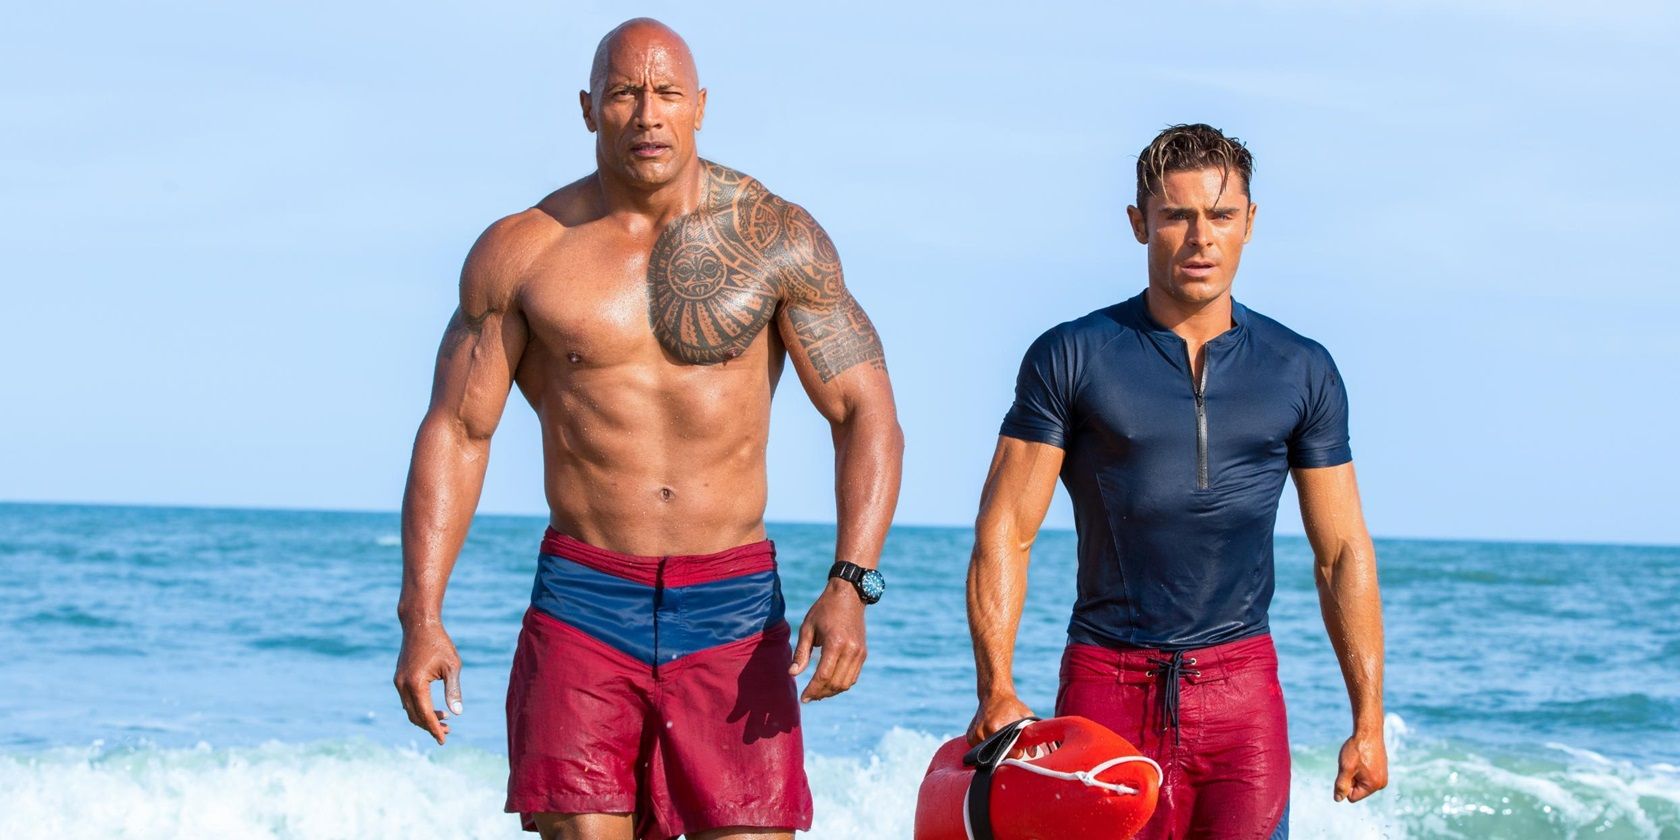 Dwayne Johnson and Zac Efron on the beach in Baywatch